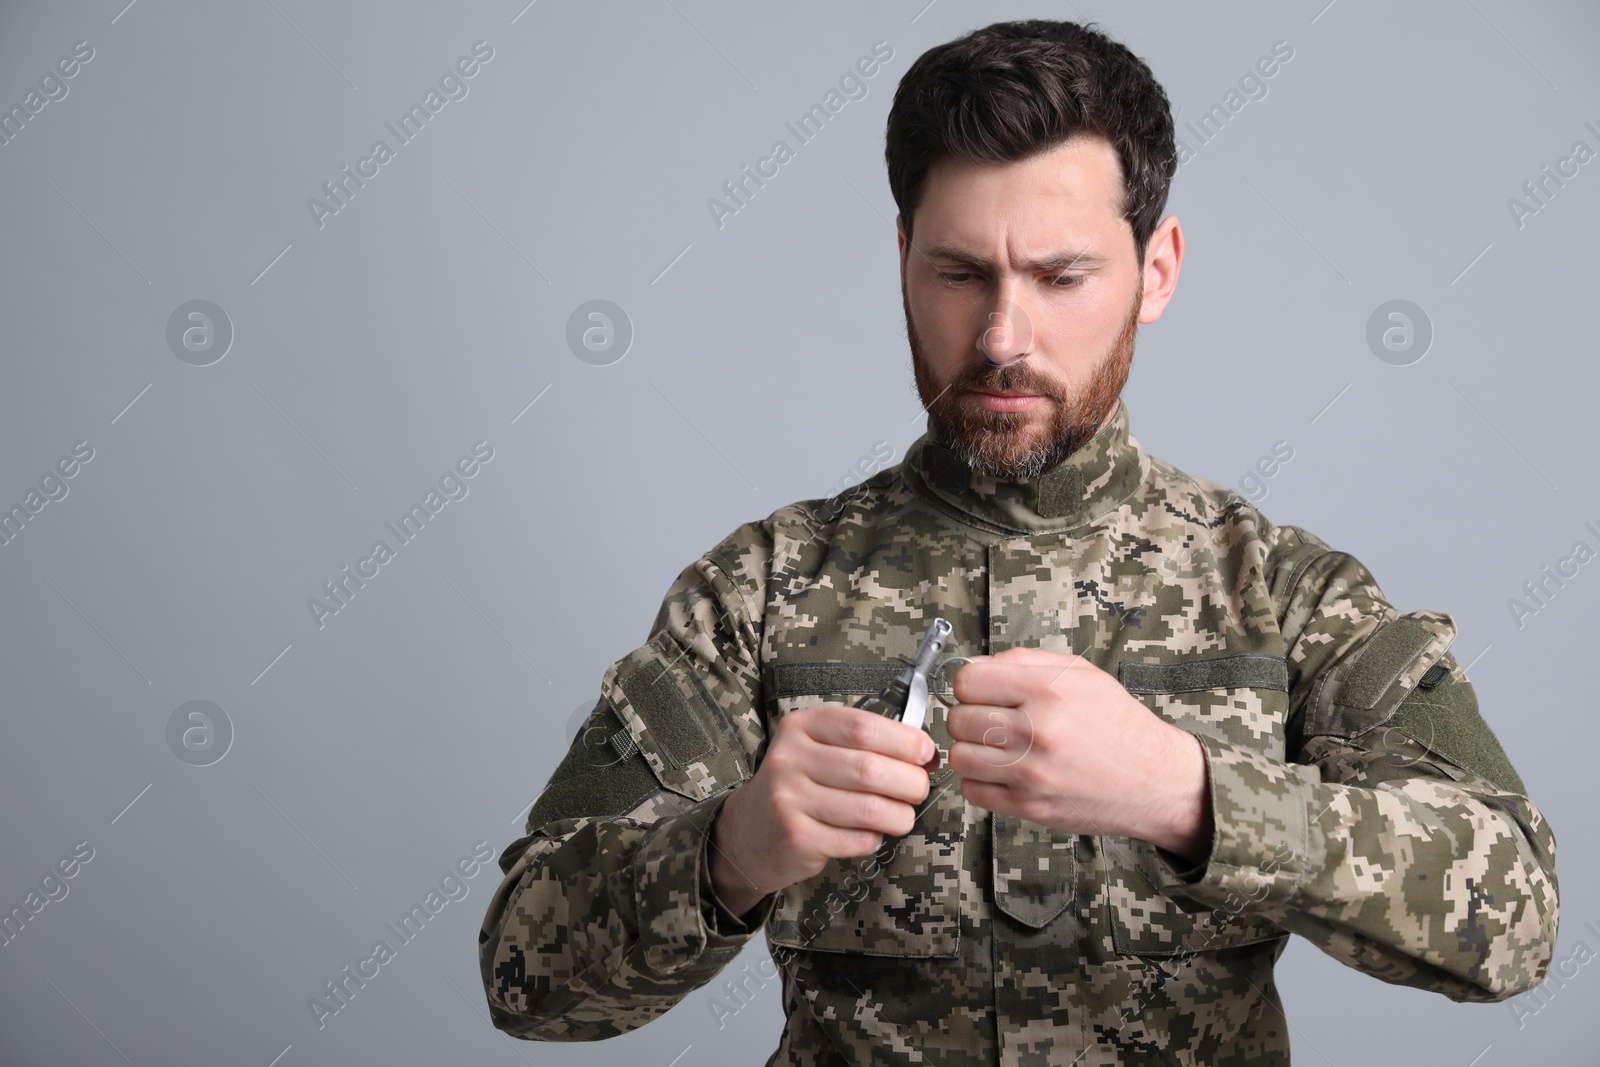 Photo of Soldier pulling safety pin out of hand grenade on light grey background. Military service